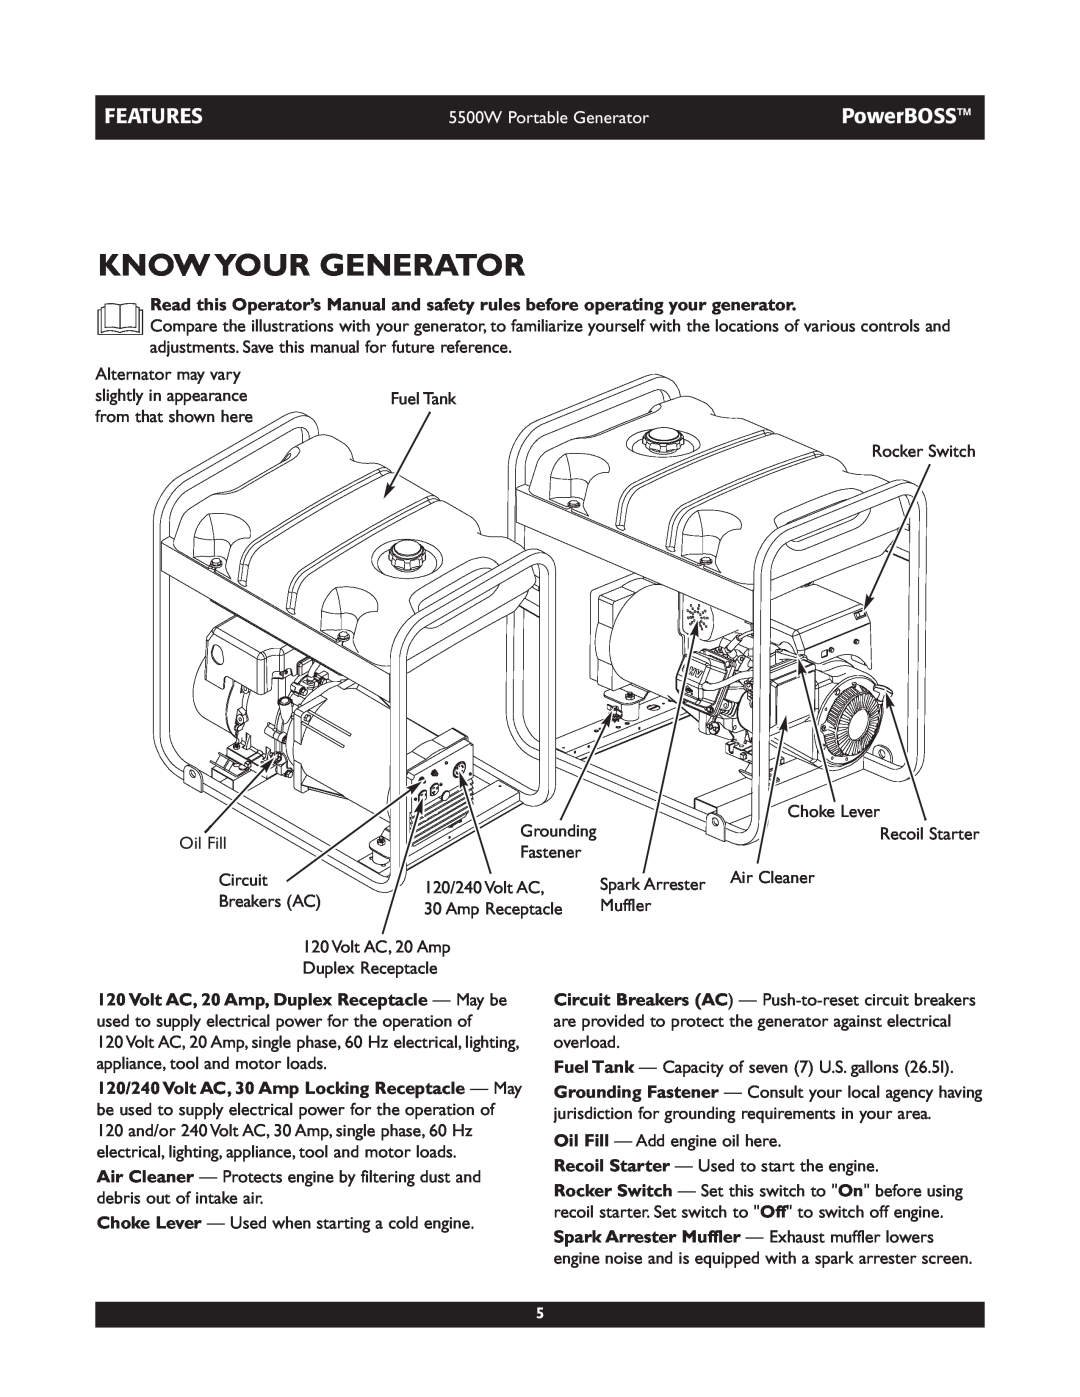 Briggs & Stratton 030255, 030249 manual Know Your Generator, Features, PowerBOSS, 5500W Portable Generator 